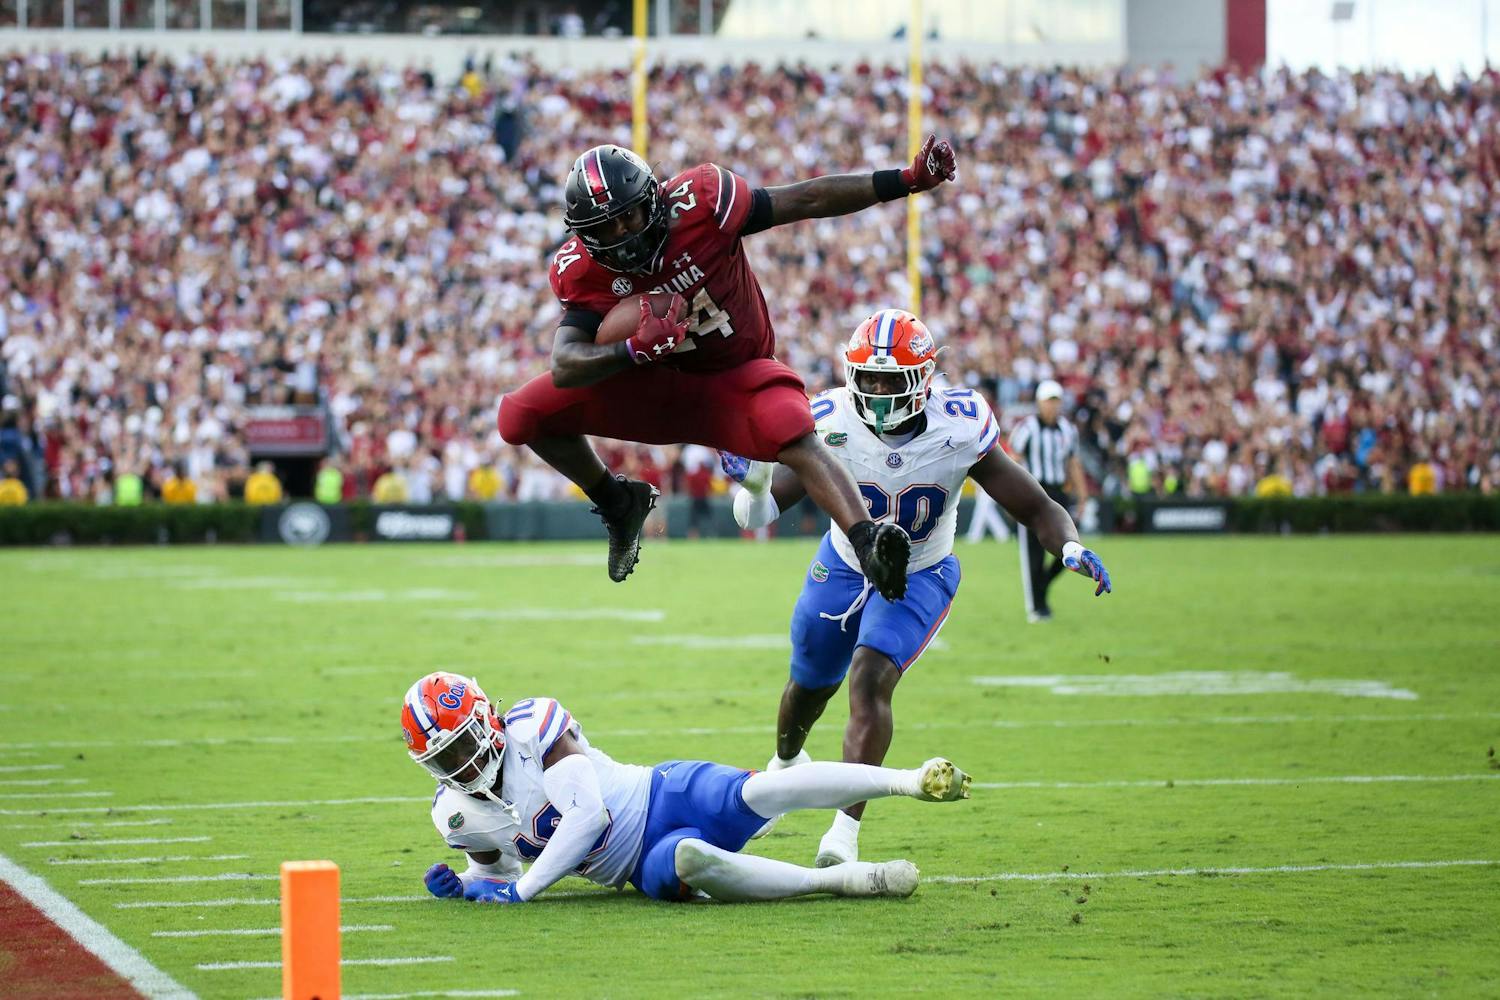 The South Carolina Gamecocks lost to the Florida Gators 41-39 in their fourth Southeastern Conference matchup of the 鶹С򽴫ý at Williams-Brice Stadium on Oct. 14, 2023. This loss puts the Gamecocks at 2-4 for the 鶹С򽴫ý.